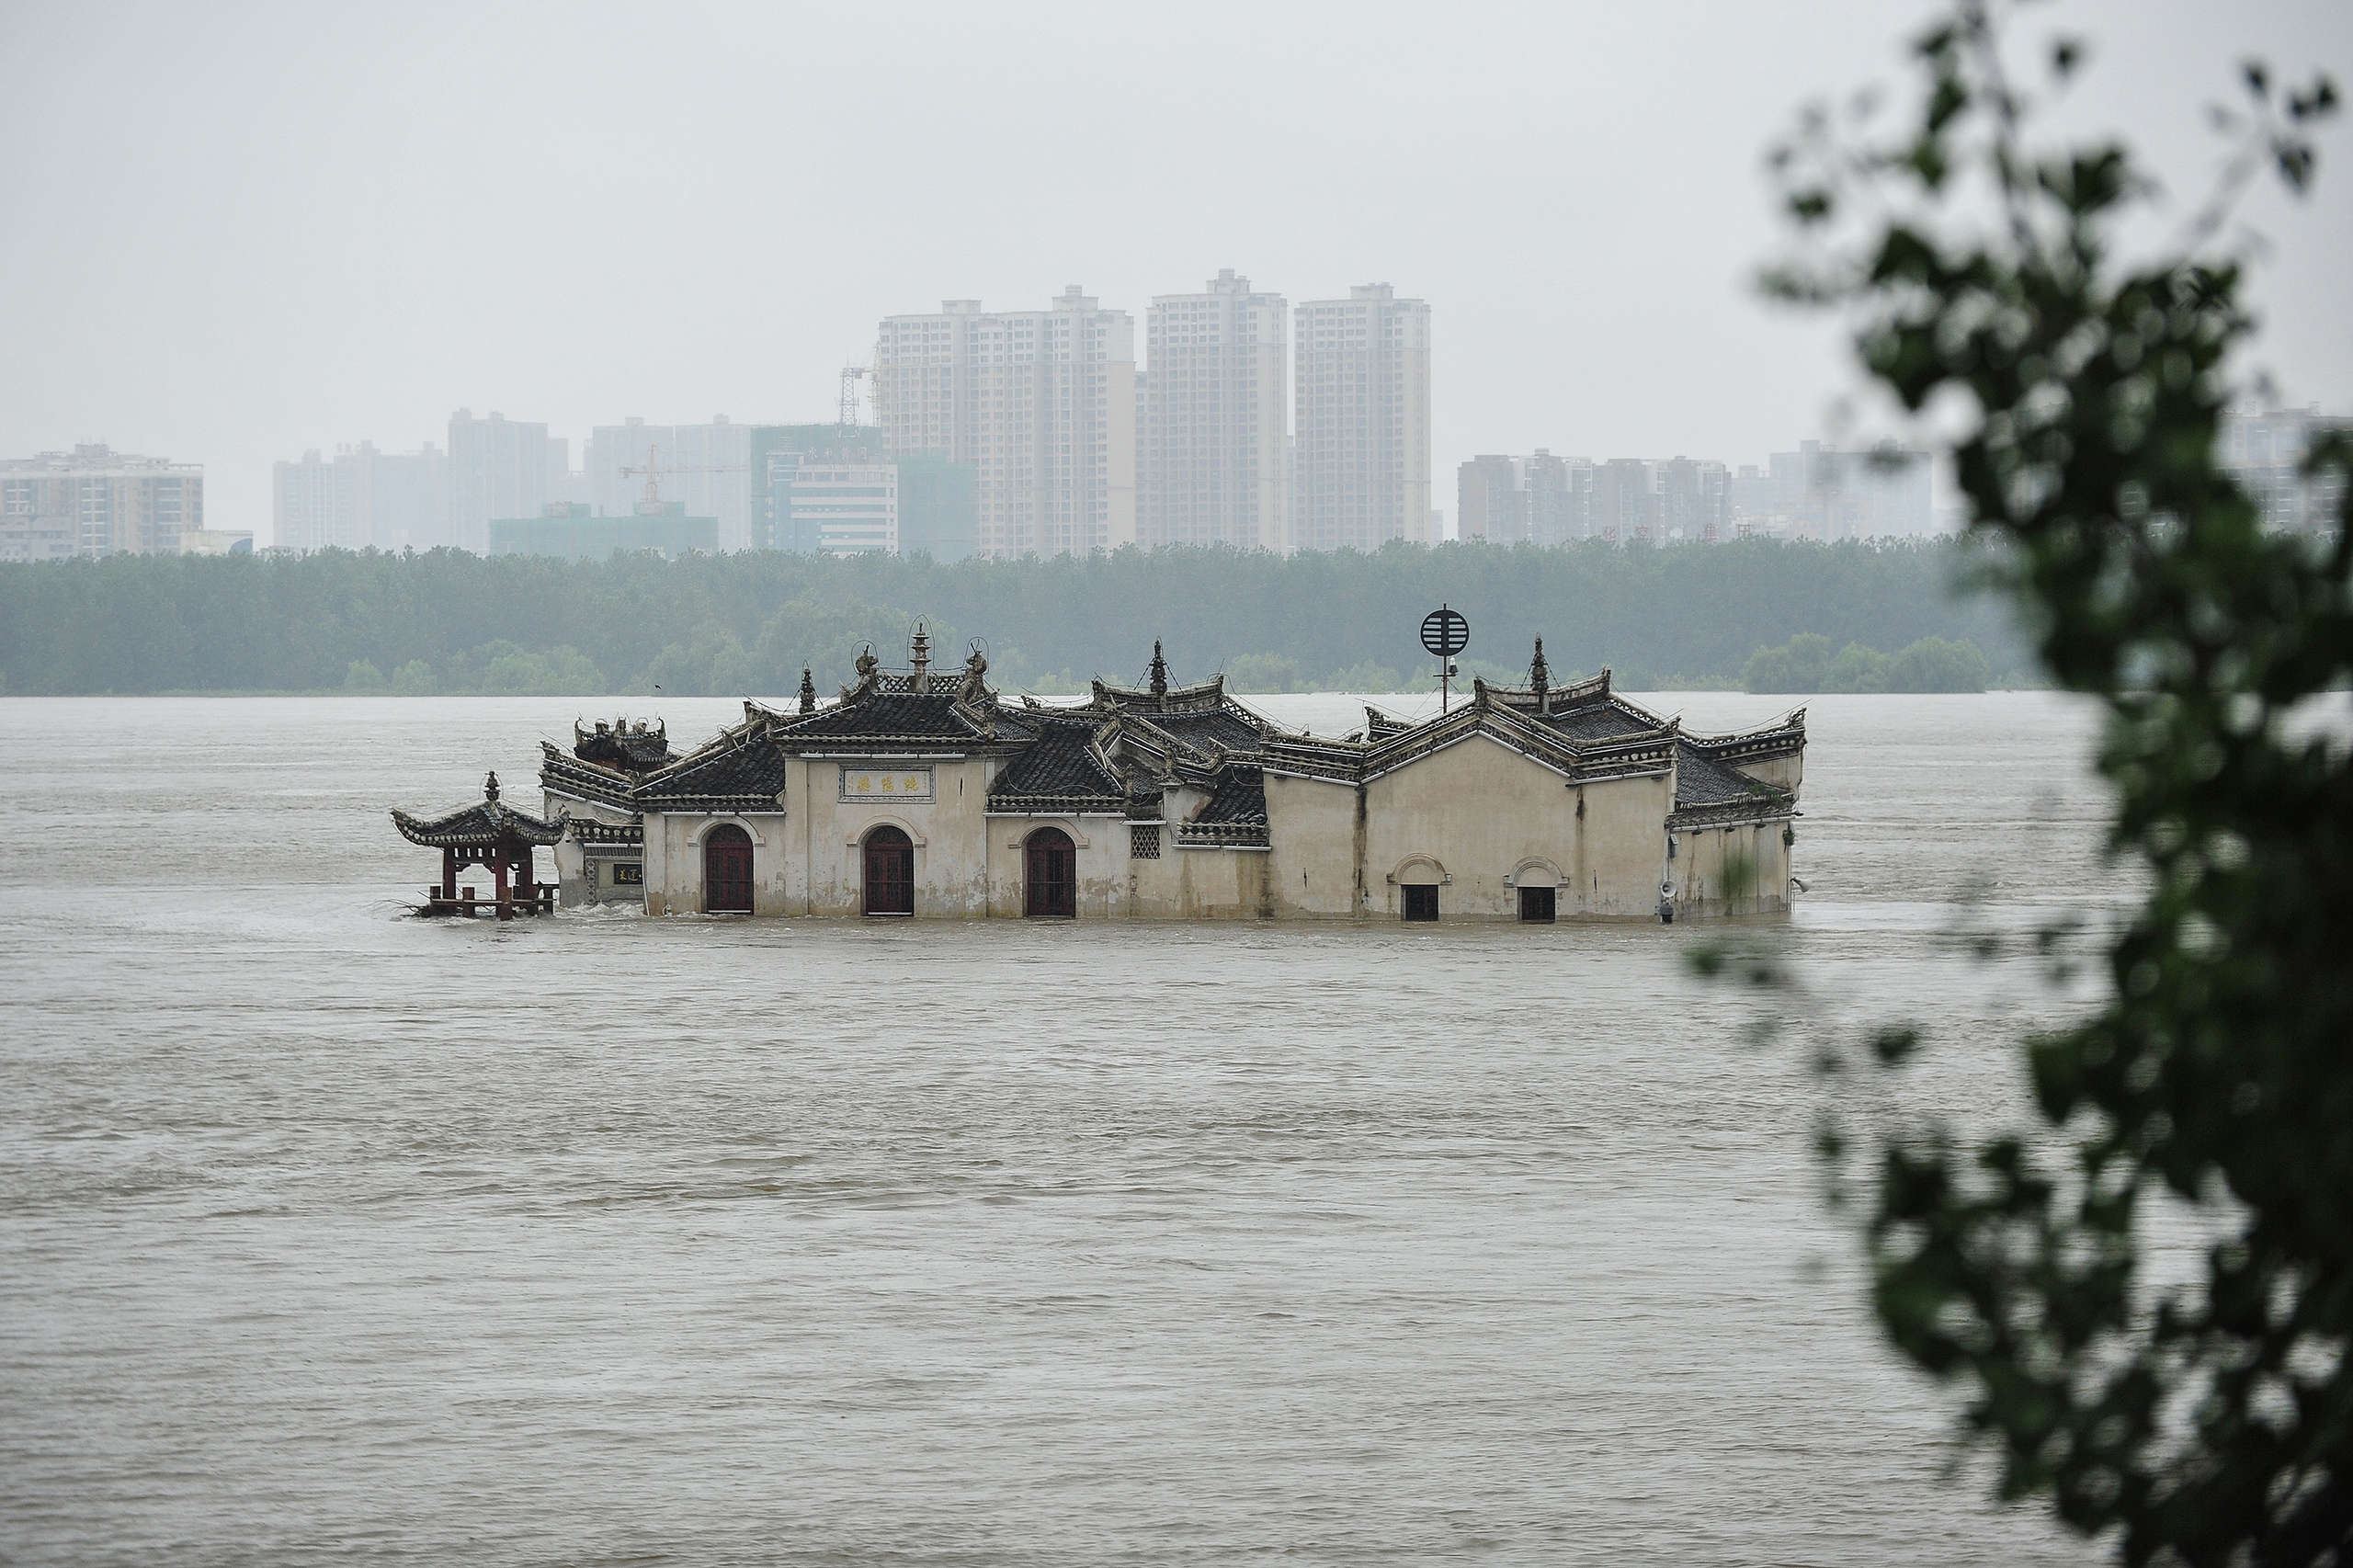 The Guanyinge temple, a 700-year old temple built on a rock, in the swollen Yangtze River in Wuhan in China's central Hubei province. - Heavy rains since June have left at least 141 people dead and missing, forced nearly 15 million people to be evacuated from their homes in July alone. © STR/AFP / Getty Images